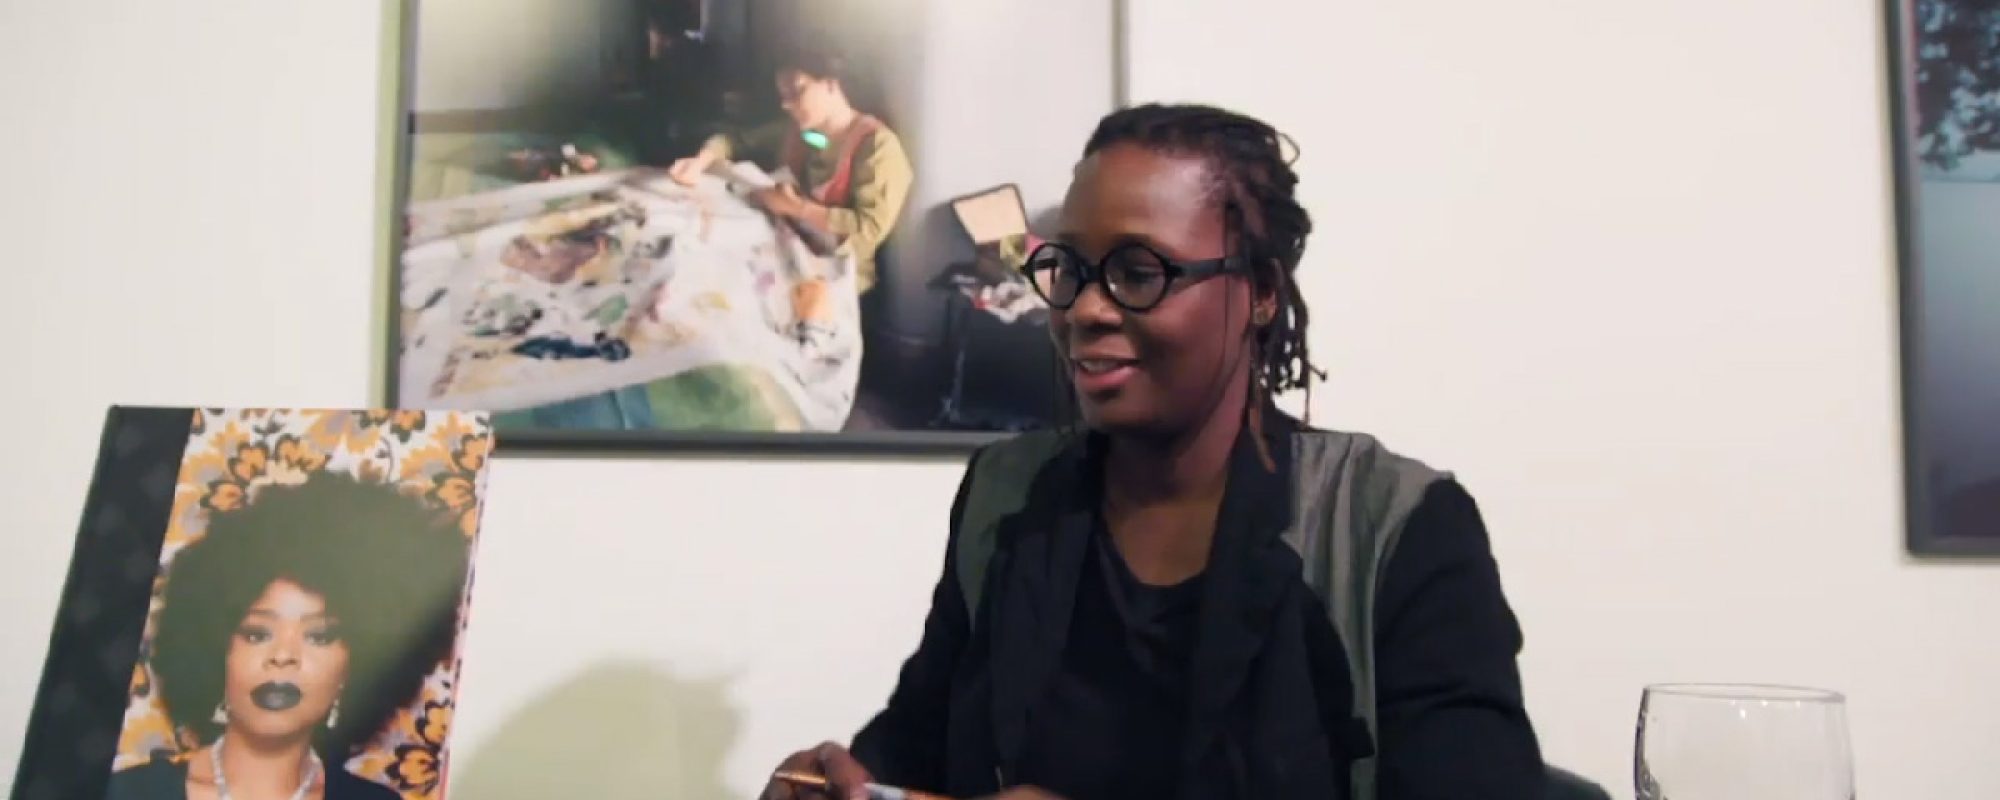 Mickalene Thomas and What Inspires Her on The Art Show